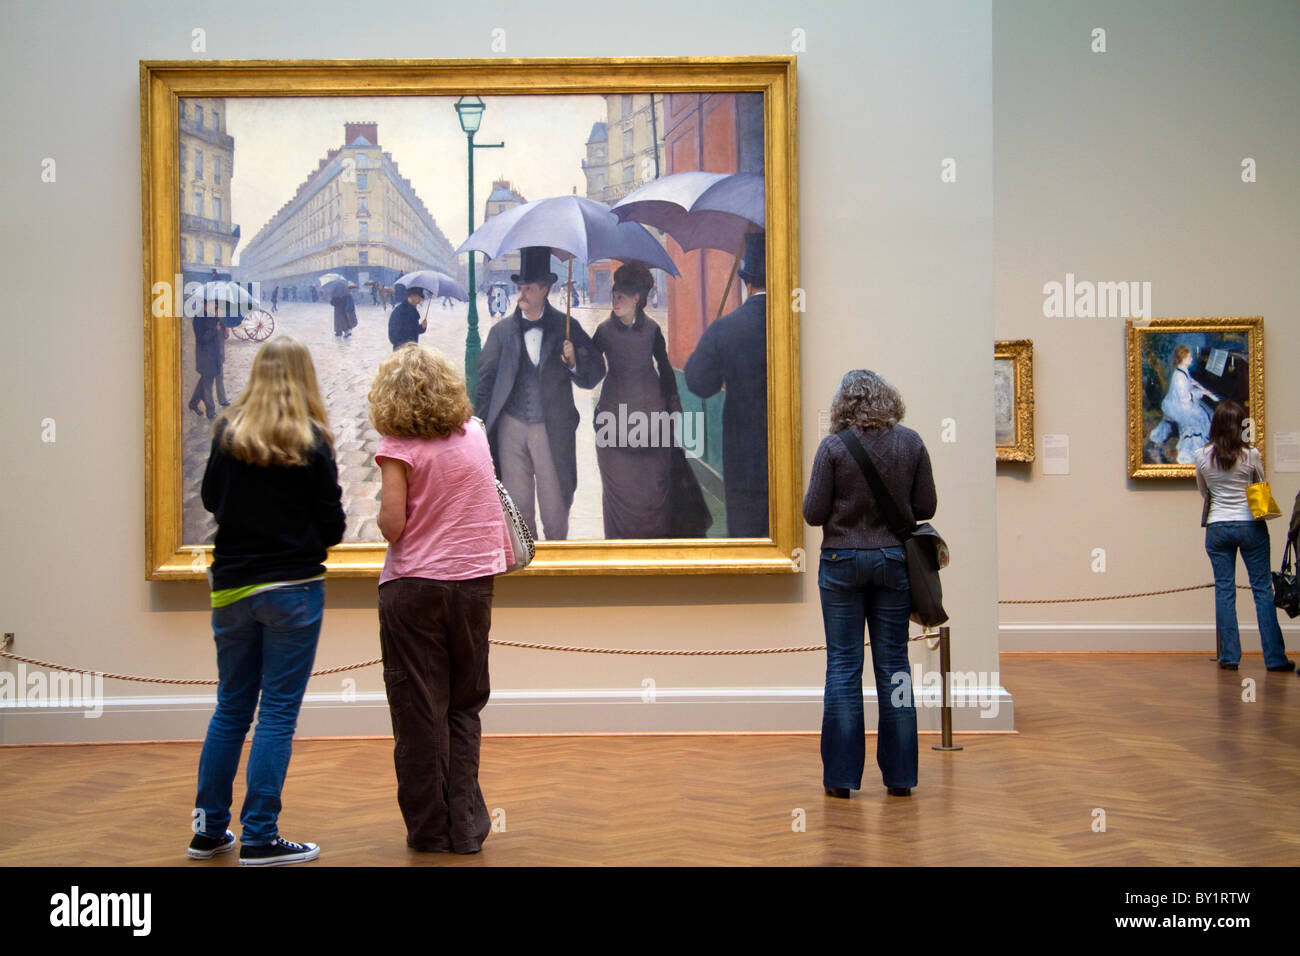 Paris Street Rainy Day Painting By Gustave Caillebotte Displayed At The Art Institute Of Chicago Illinois Usa Stock Photo Alamy